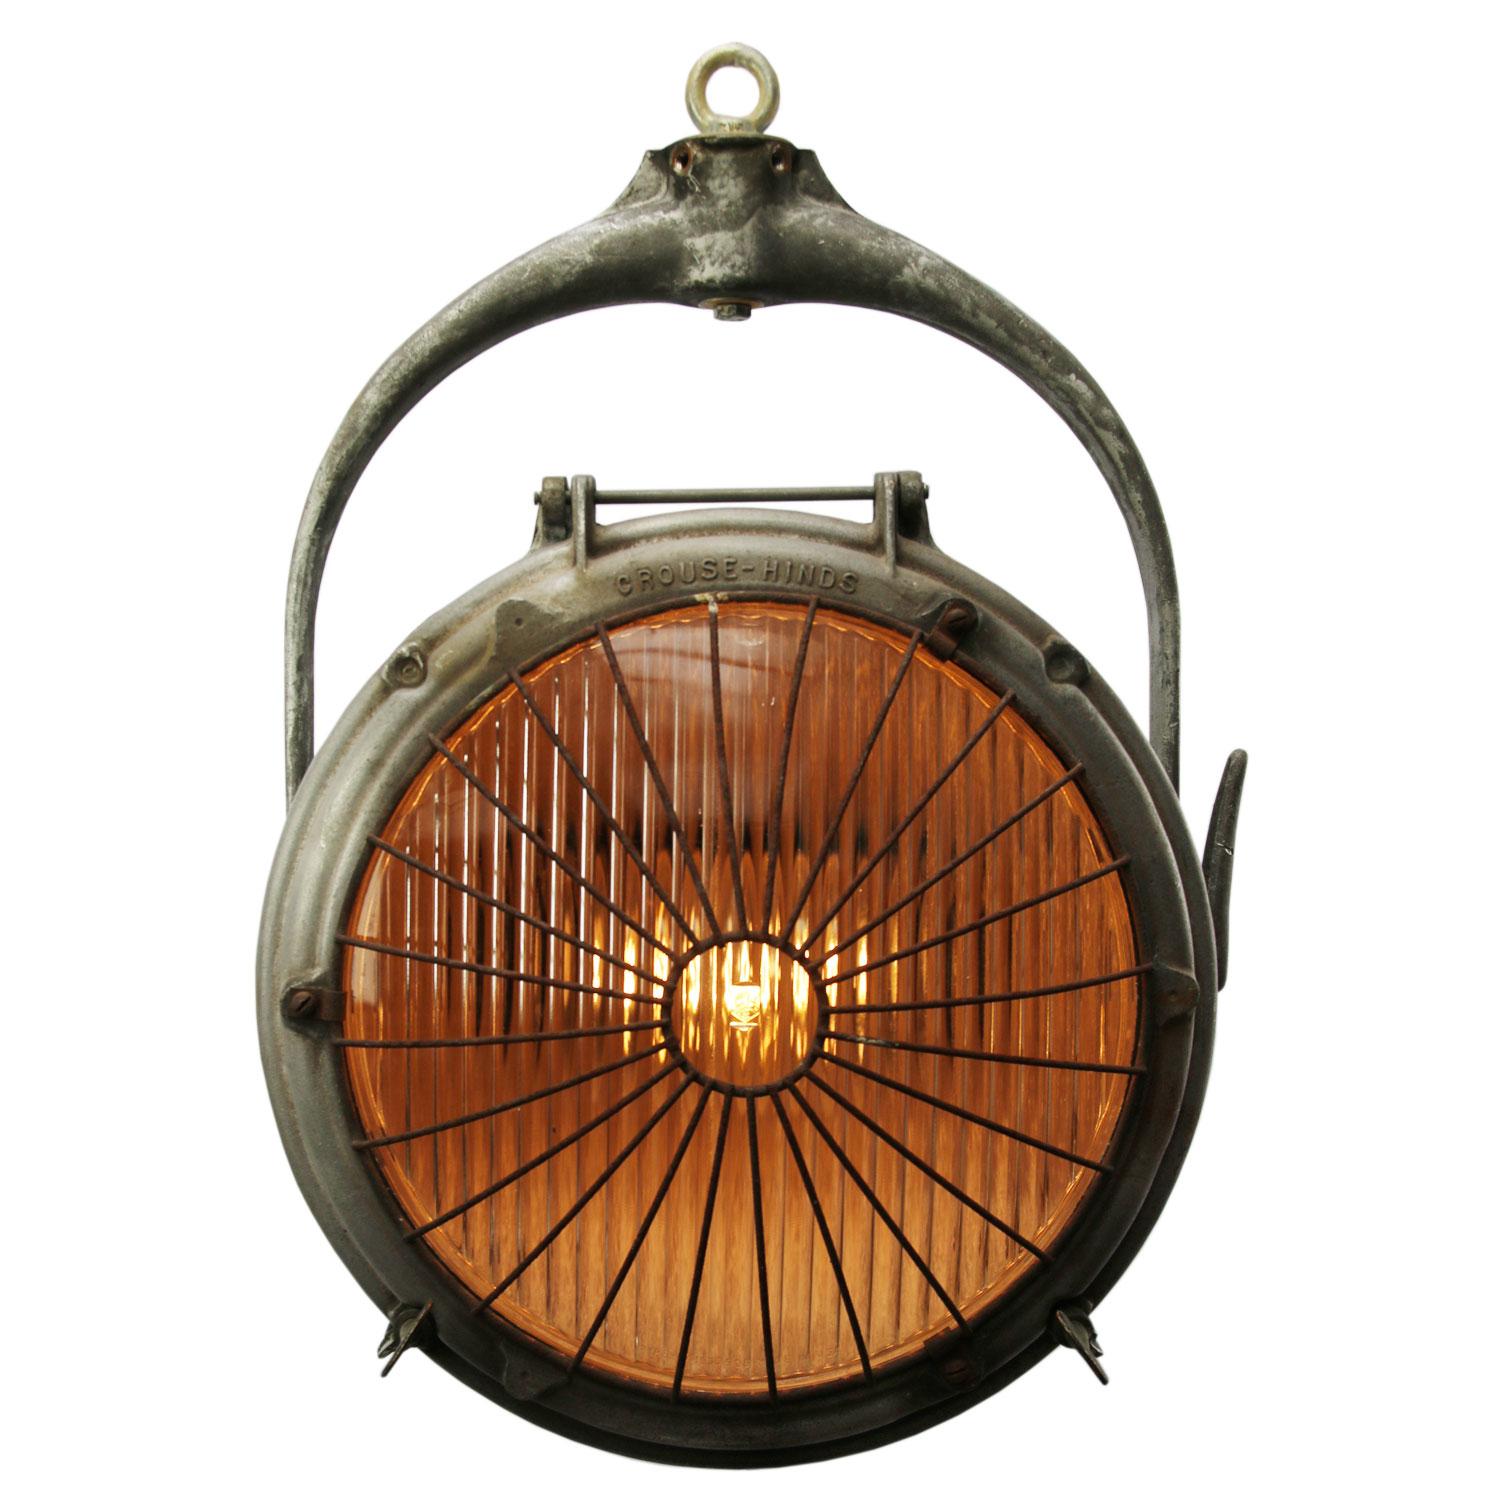 Industrial hanging Light Crouse Hinds Spot USA.
Cast aluminium with striped frosted glass. Measures: Diameter 33.5 cm

Weight 12.5 kg / 27.6 lb

Priced per individual item. All lamps have been made suitable by international standards for